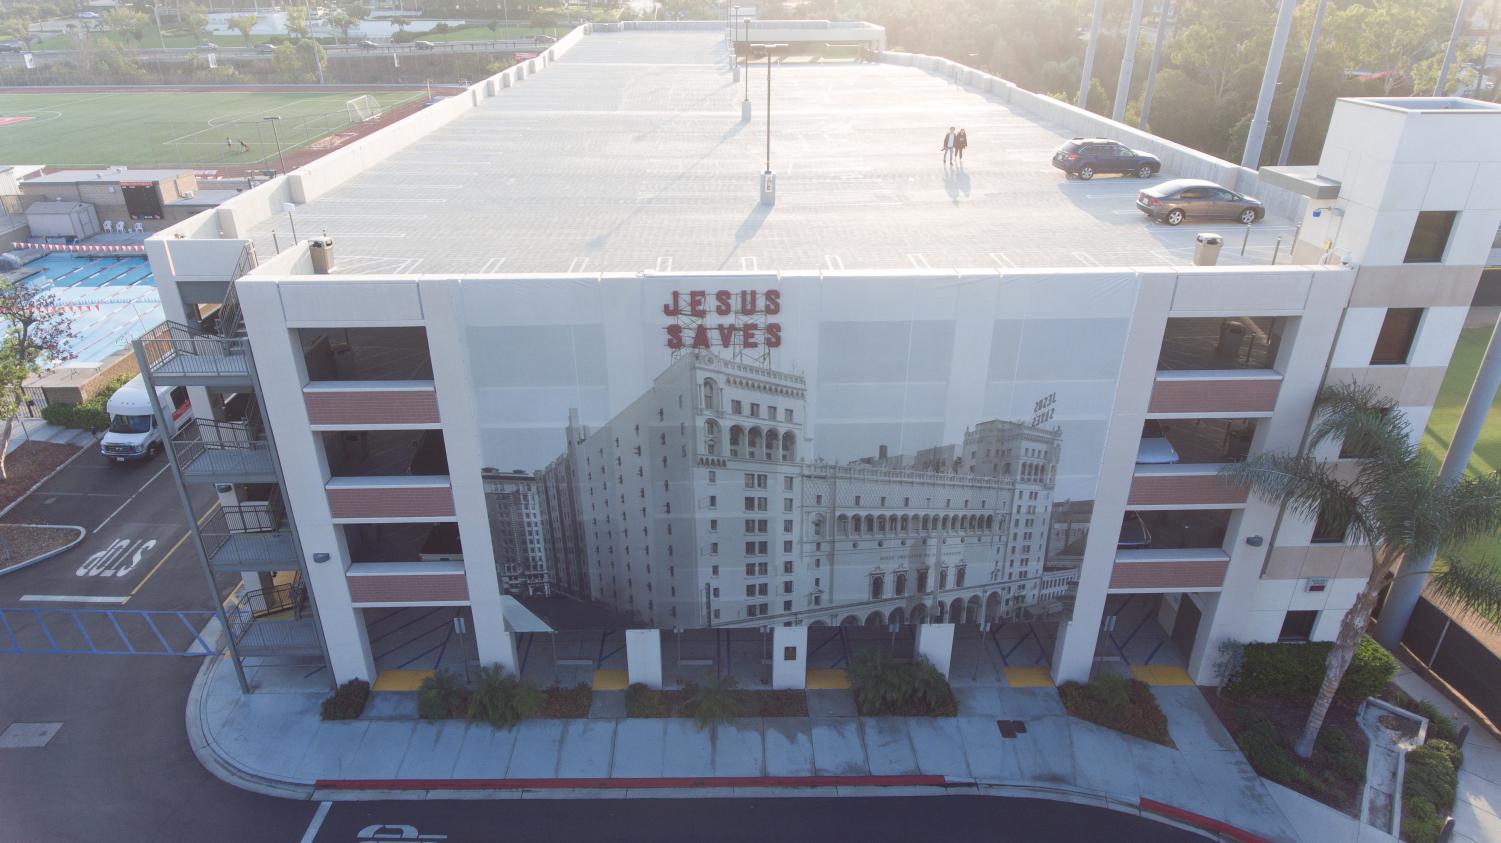 Photo depicts a birds eye view drone image of the Jesus Saves Parking Structure